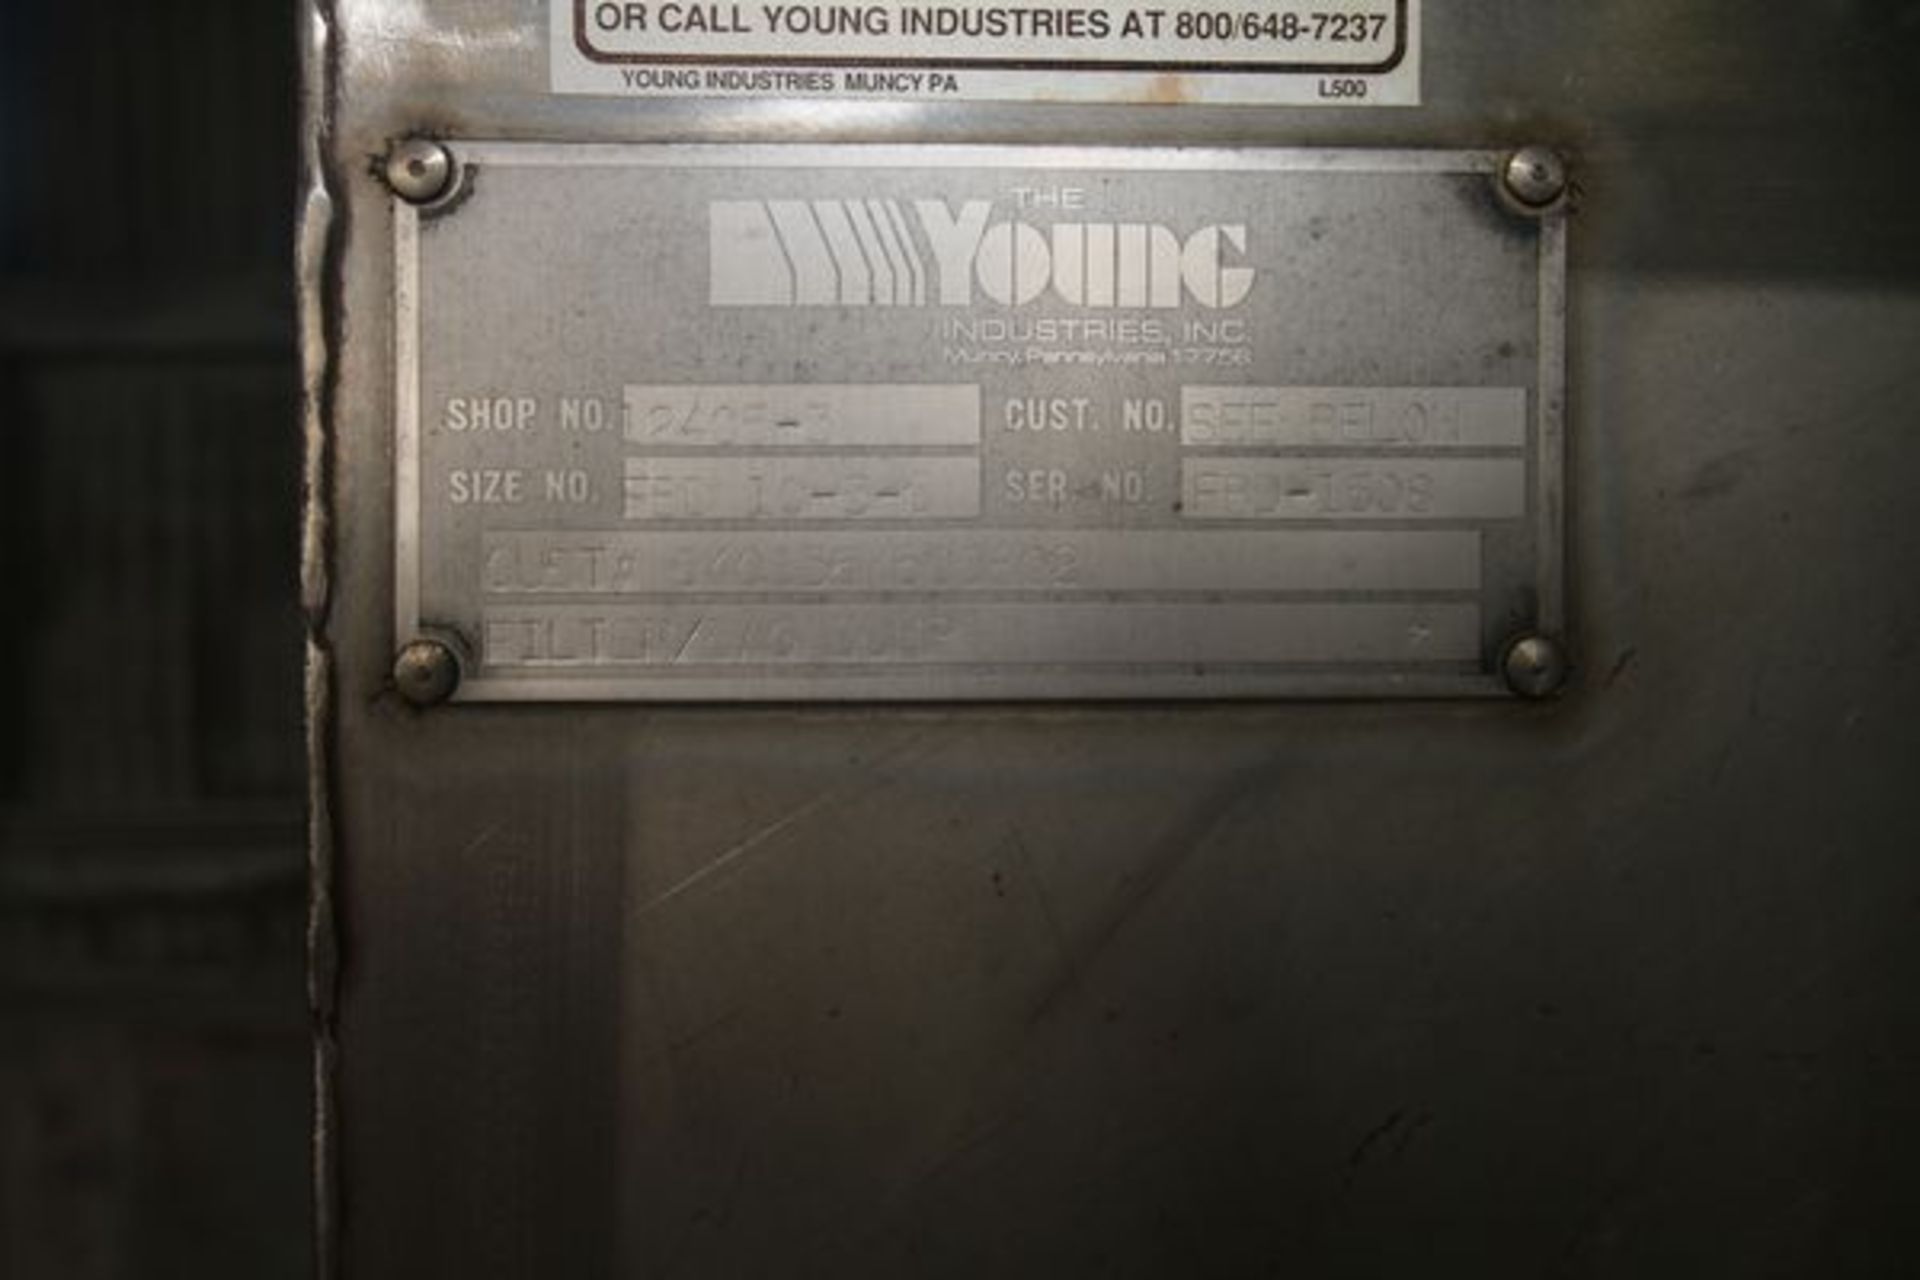 Young S/S Filter/Bag Dump, S/N FBD-1508 with Pressure Control Box - Image 2 of 3